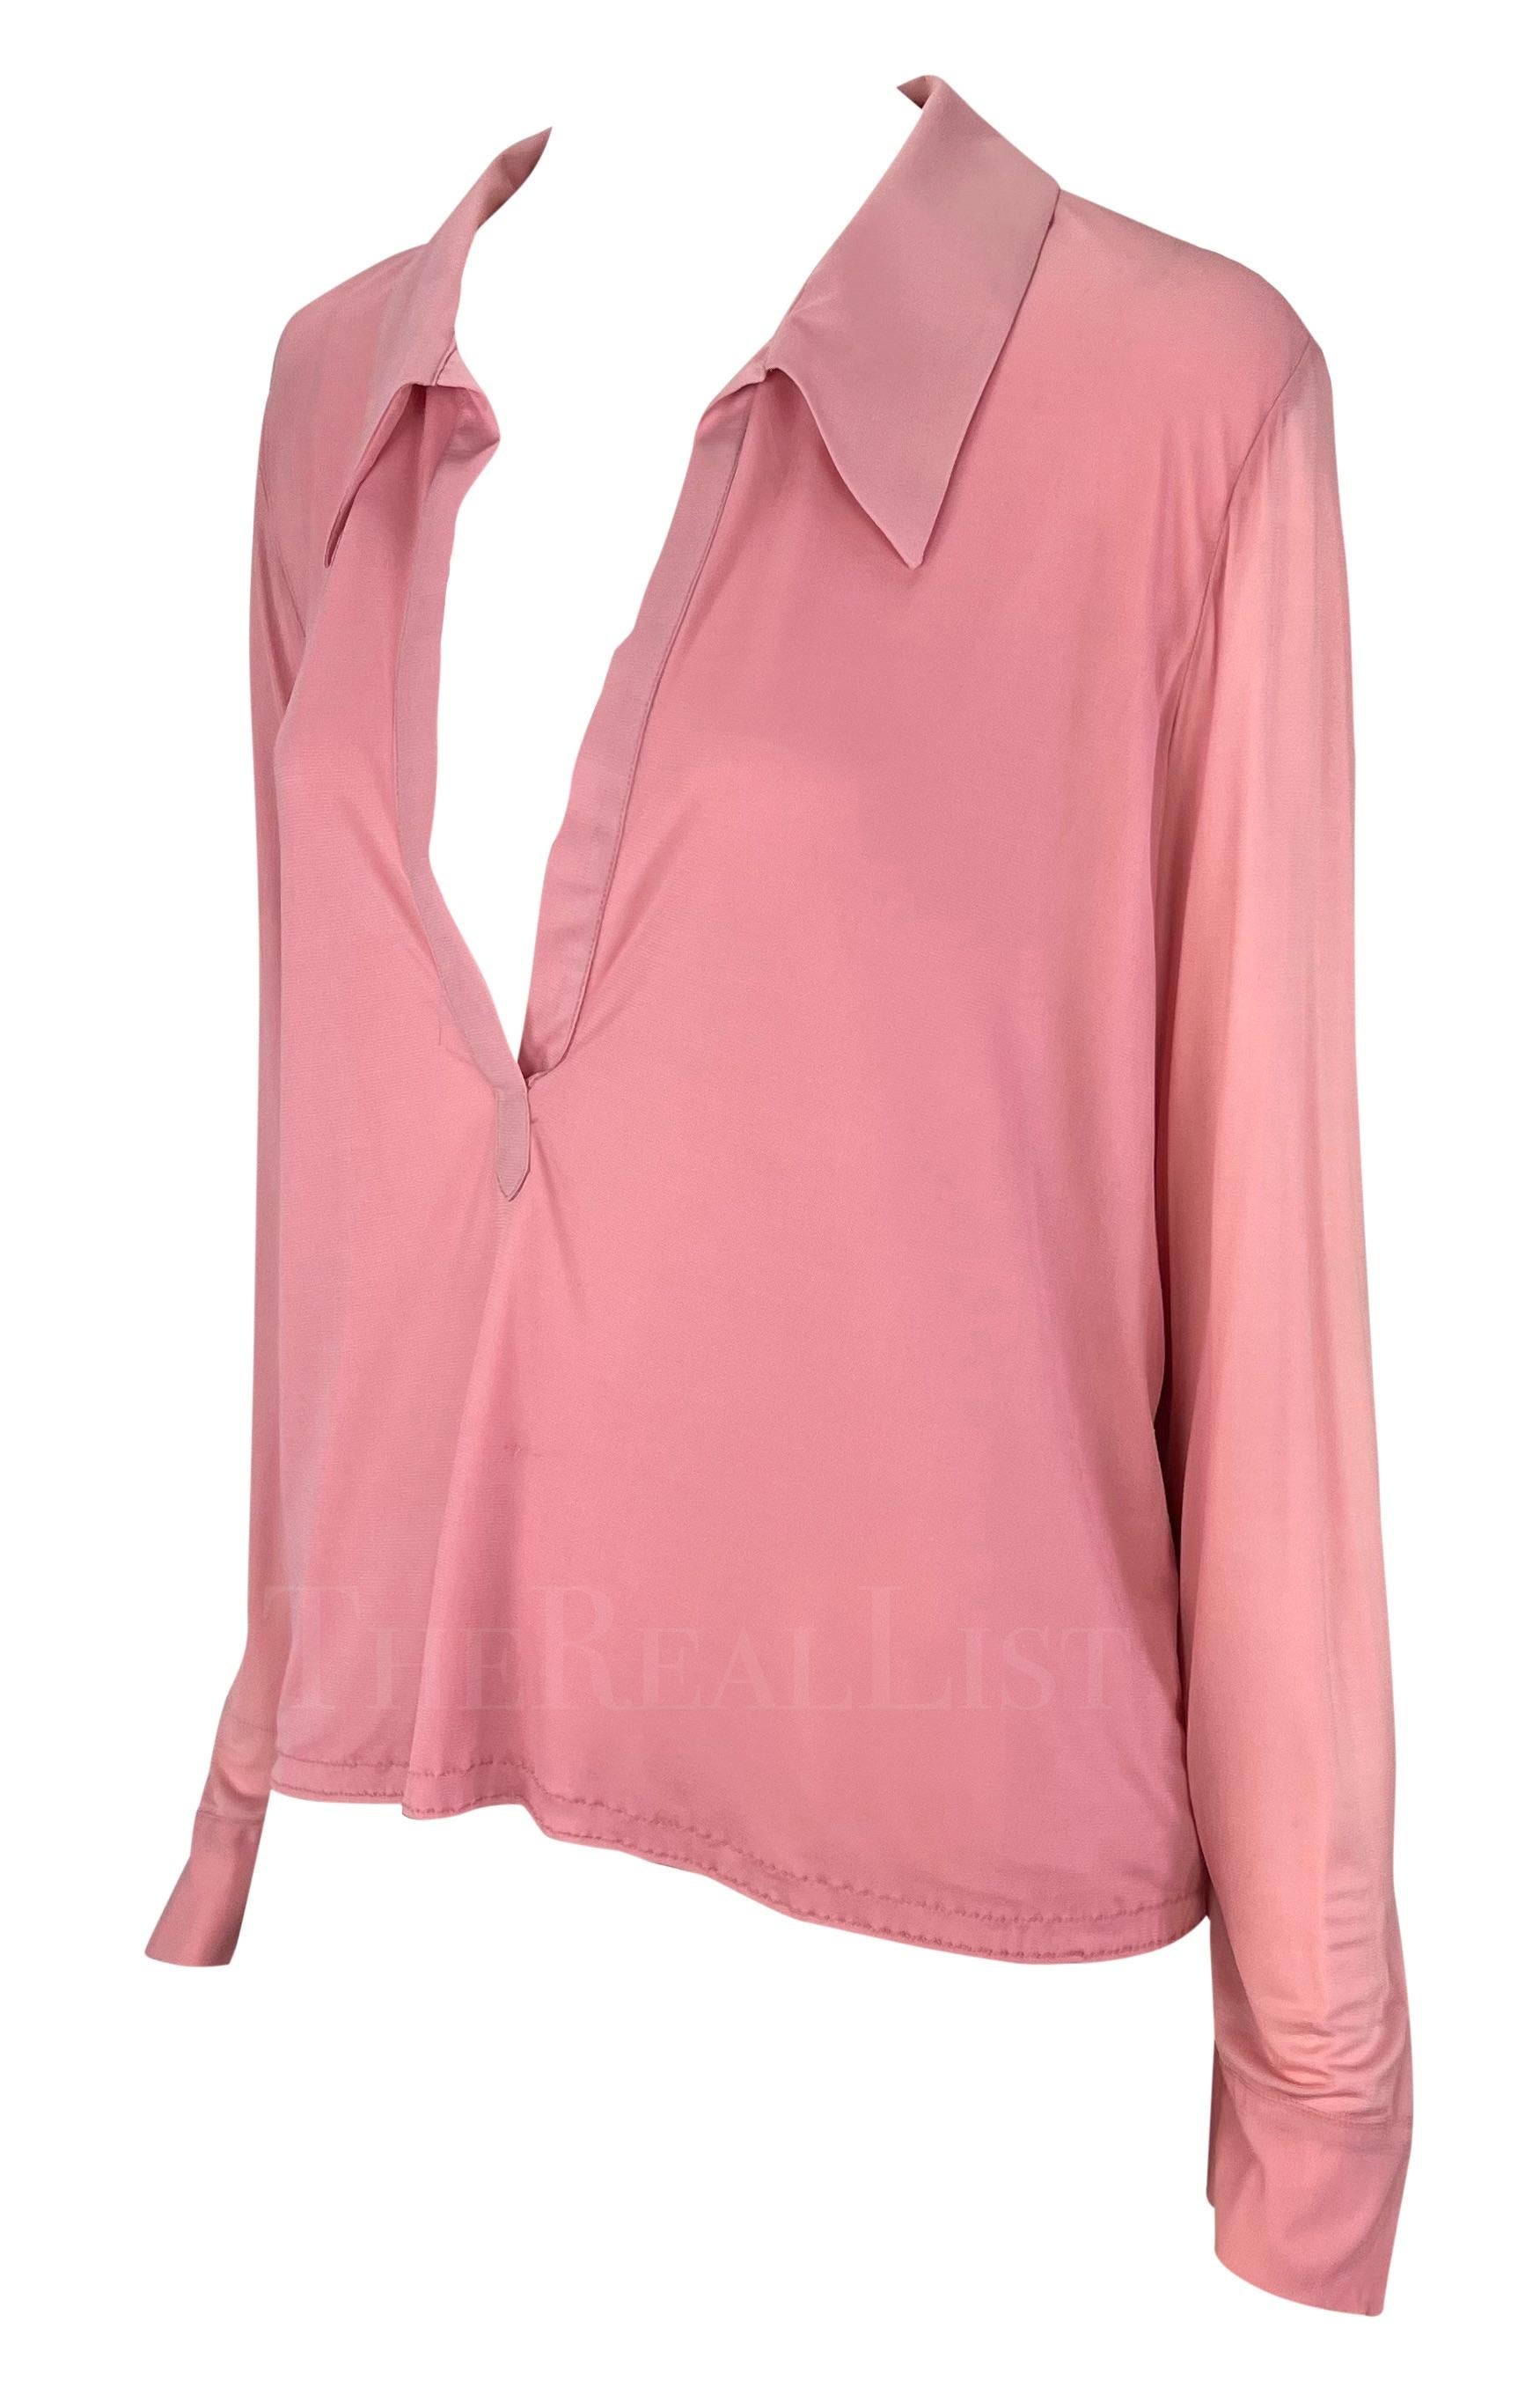 Women's NWT S/S 2000 Gucci by Tom Ford Runway Ad Plunging Pink Collared Blouse Top For Sale